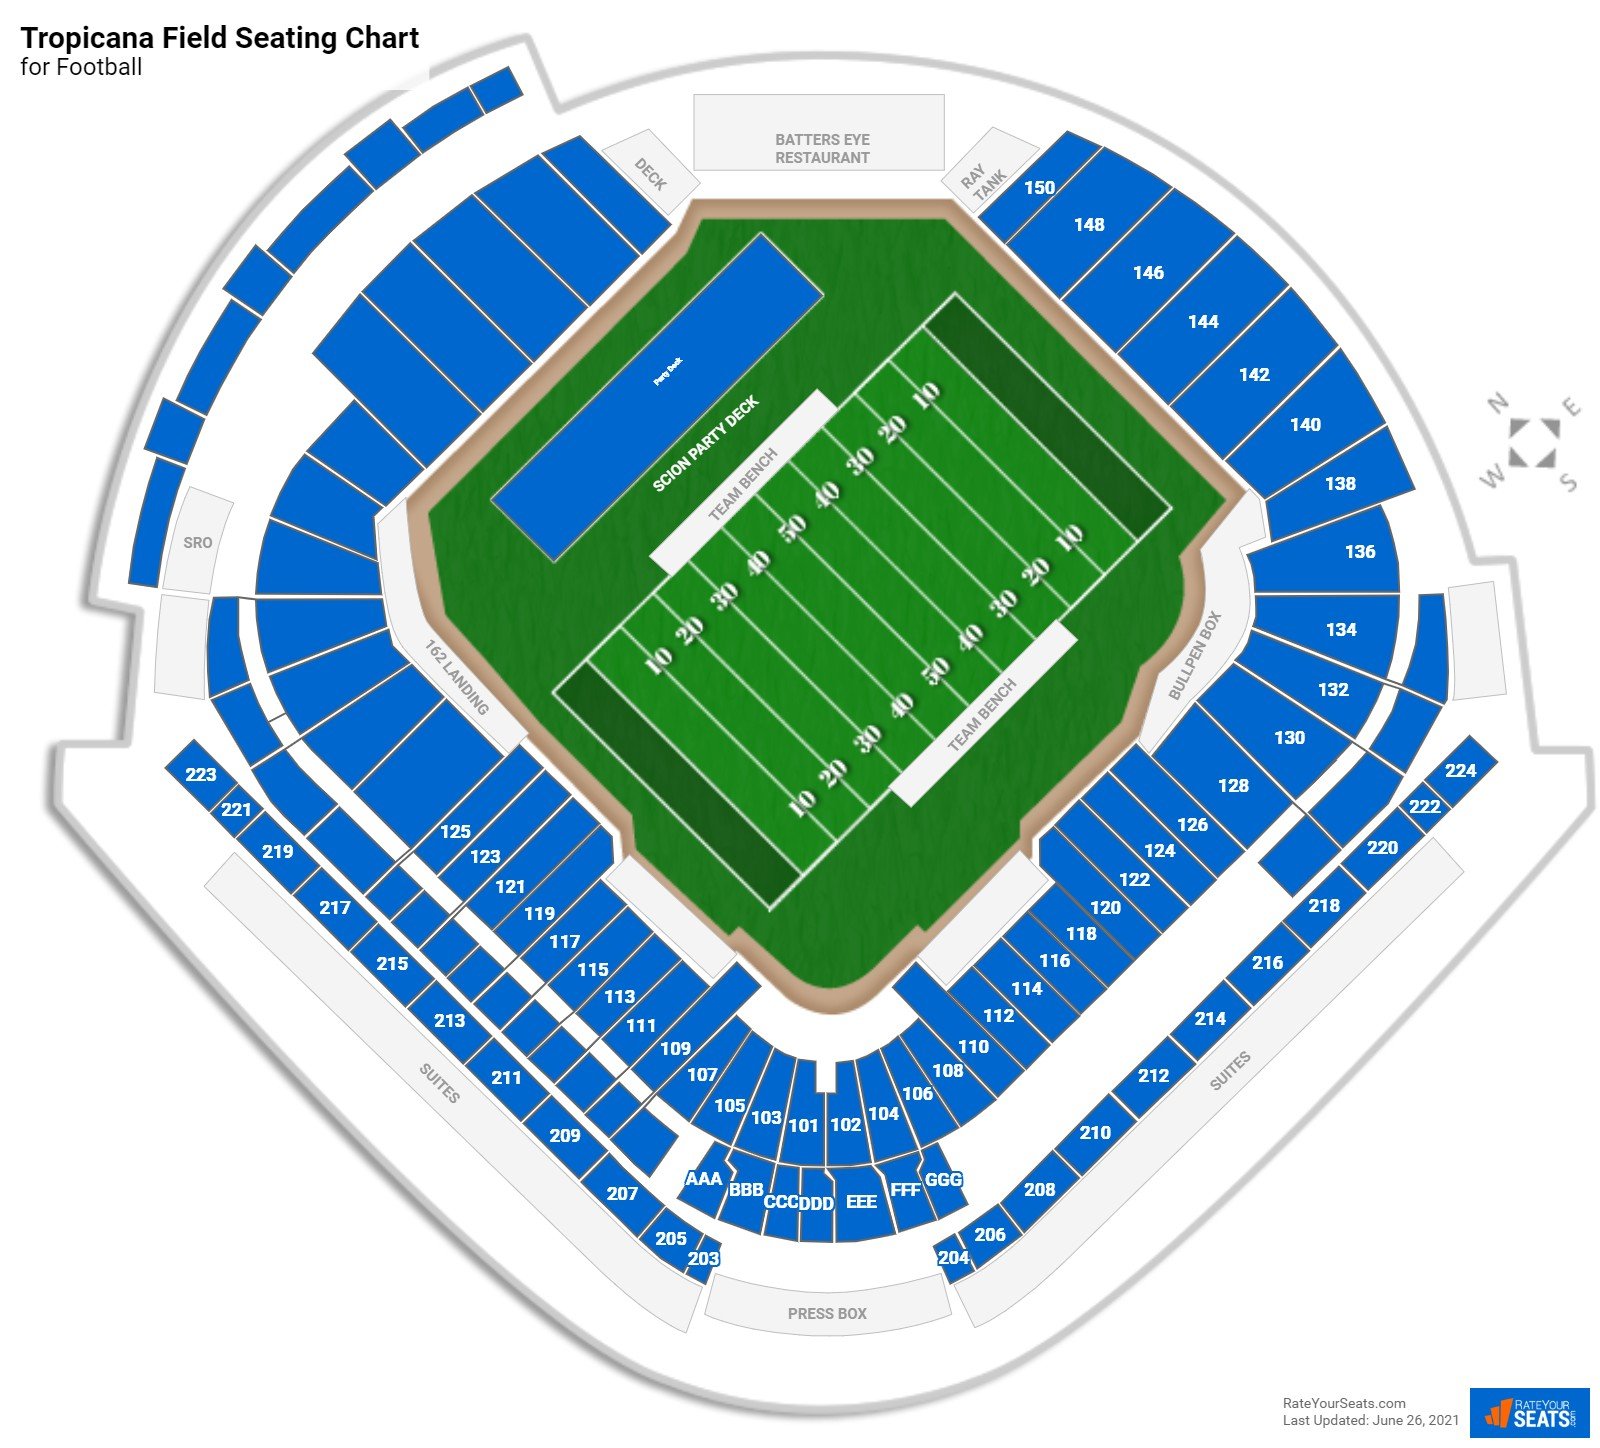 Tropicana Field Seating Charts for Football - RateYourSeats.com